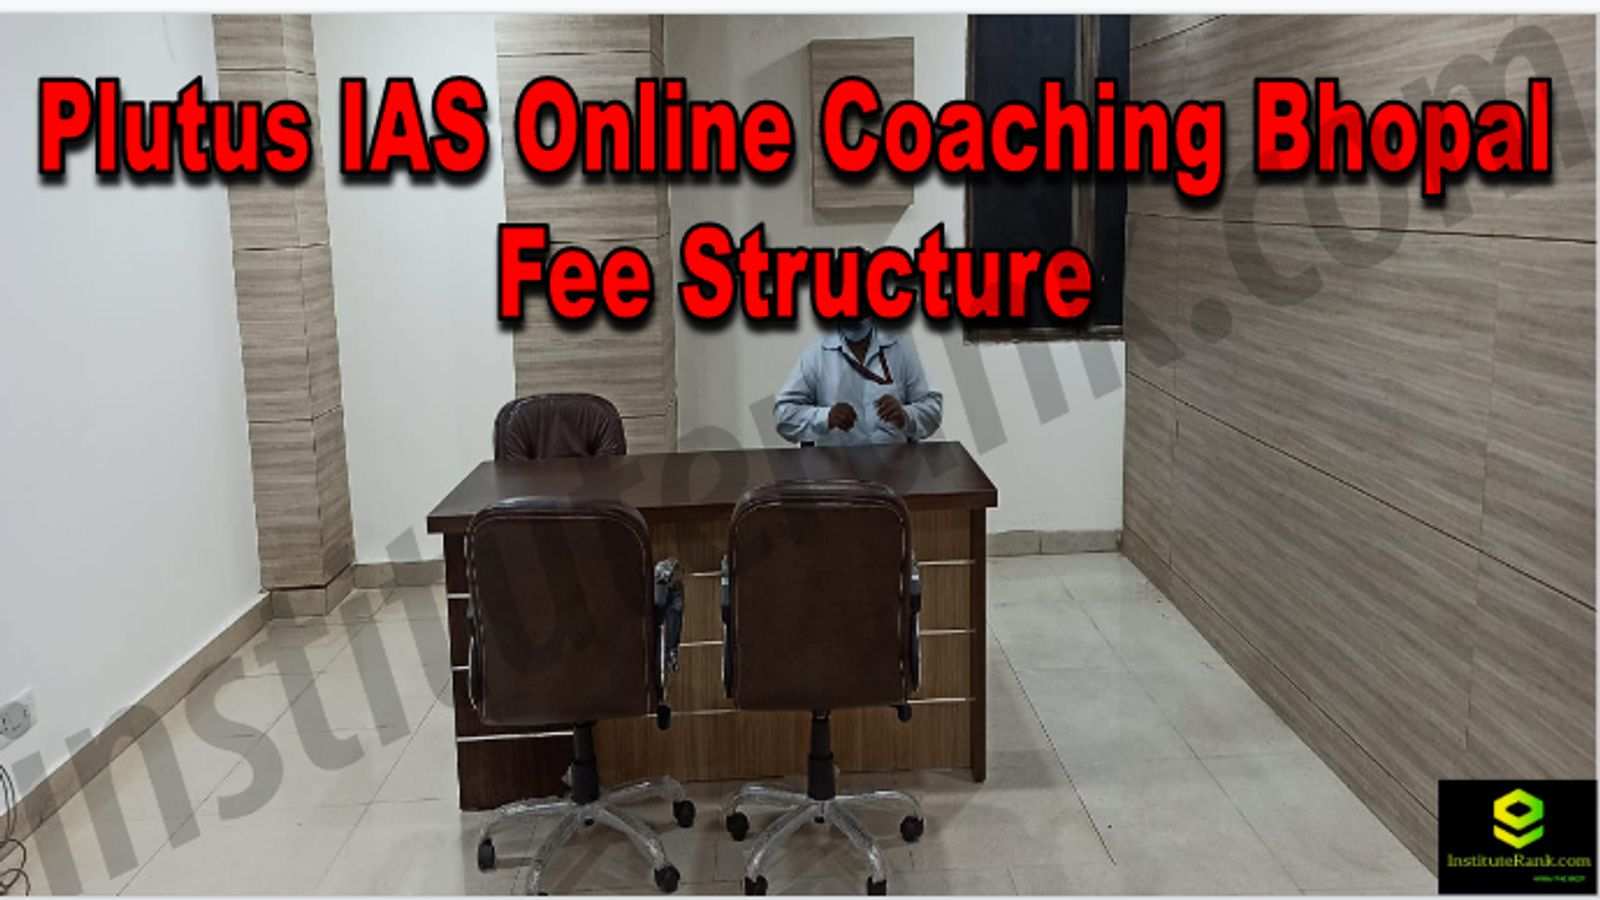 Plutus IAS Online Coaching Bhopal Reviews Fee Structure